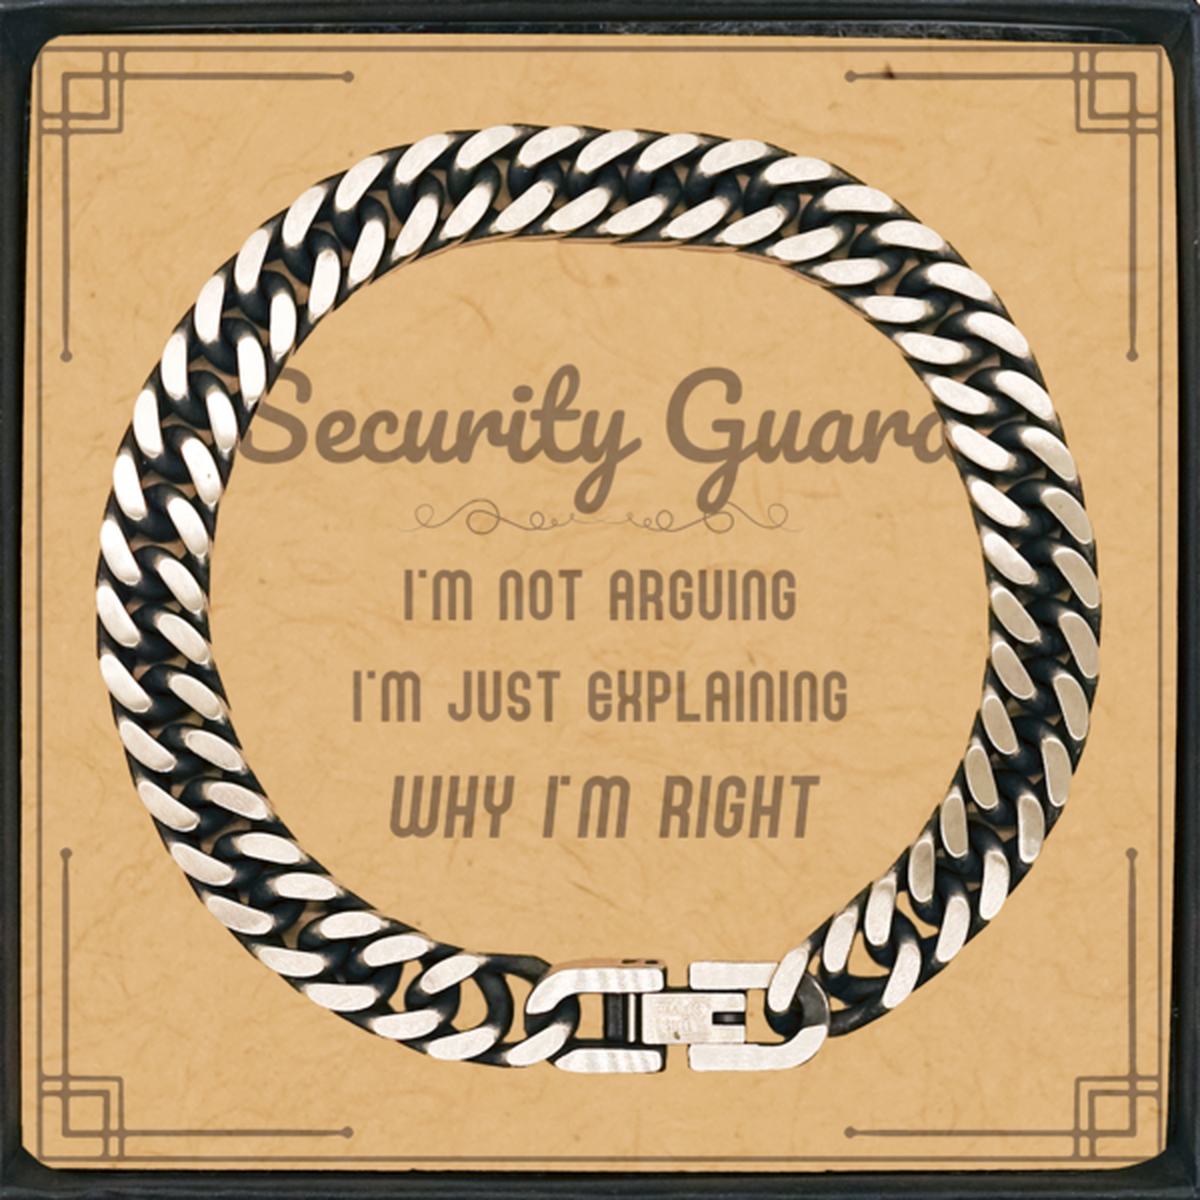 Security Guard I'm not Arguing. I'm Just Explaining Why I'm RIGHT Cuban Link Chain Bracelet, Funny Saying Quote Security Guard Gifts For Security Guard Message Card Graduation Birthday Christmas Gifts for Men Women Coworker